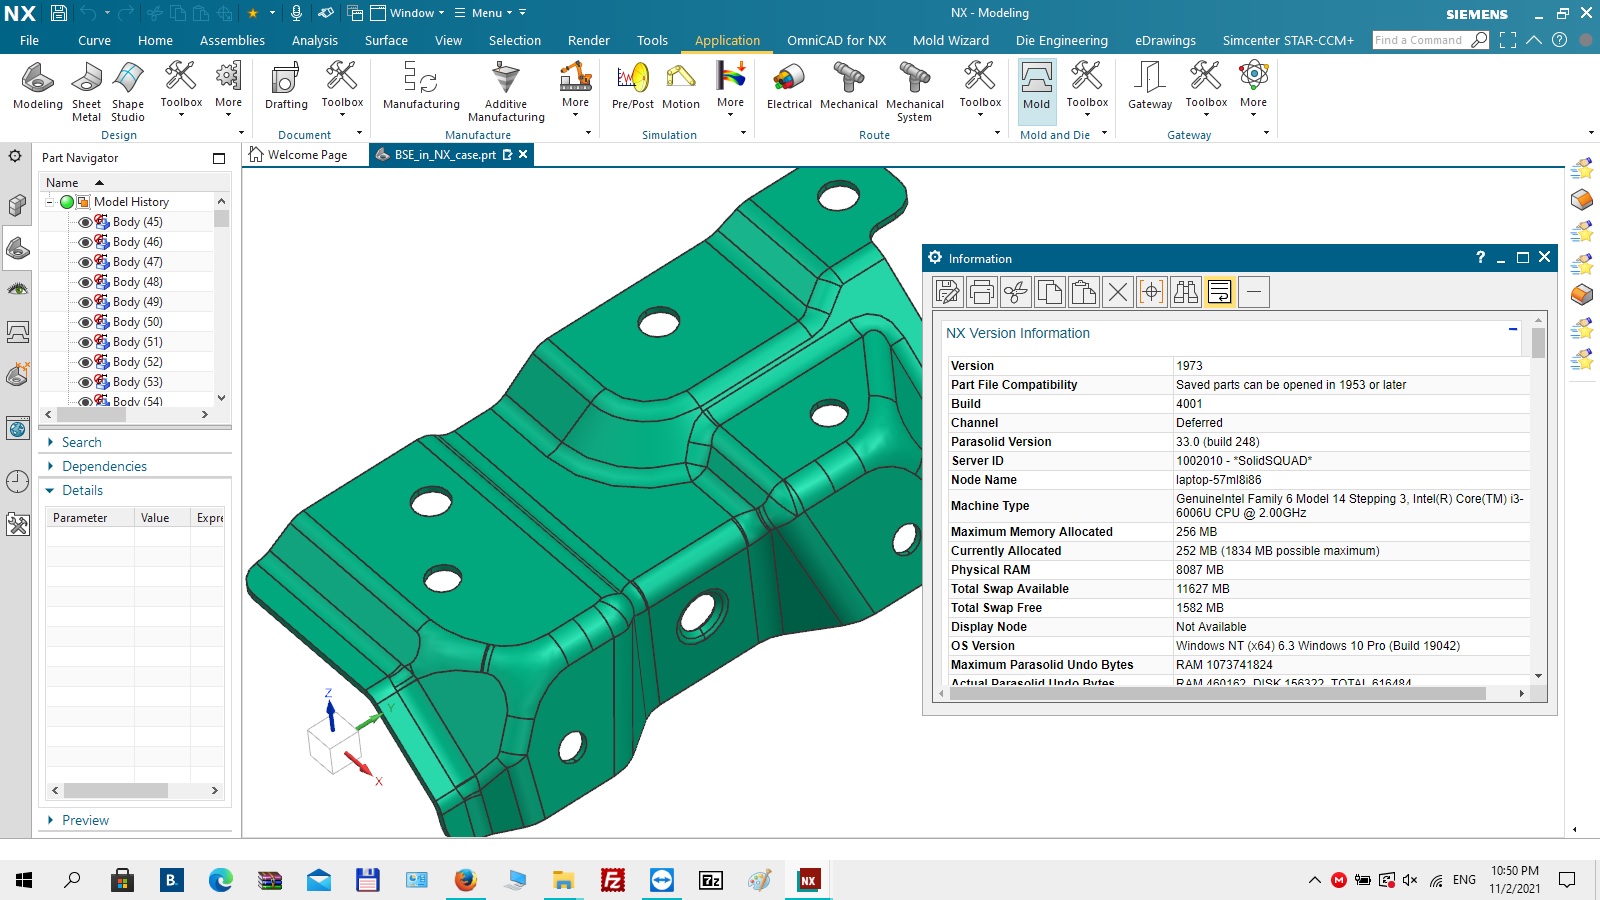 Working with Siemens NX 1973 Build 4001 full